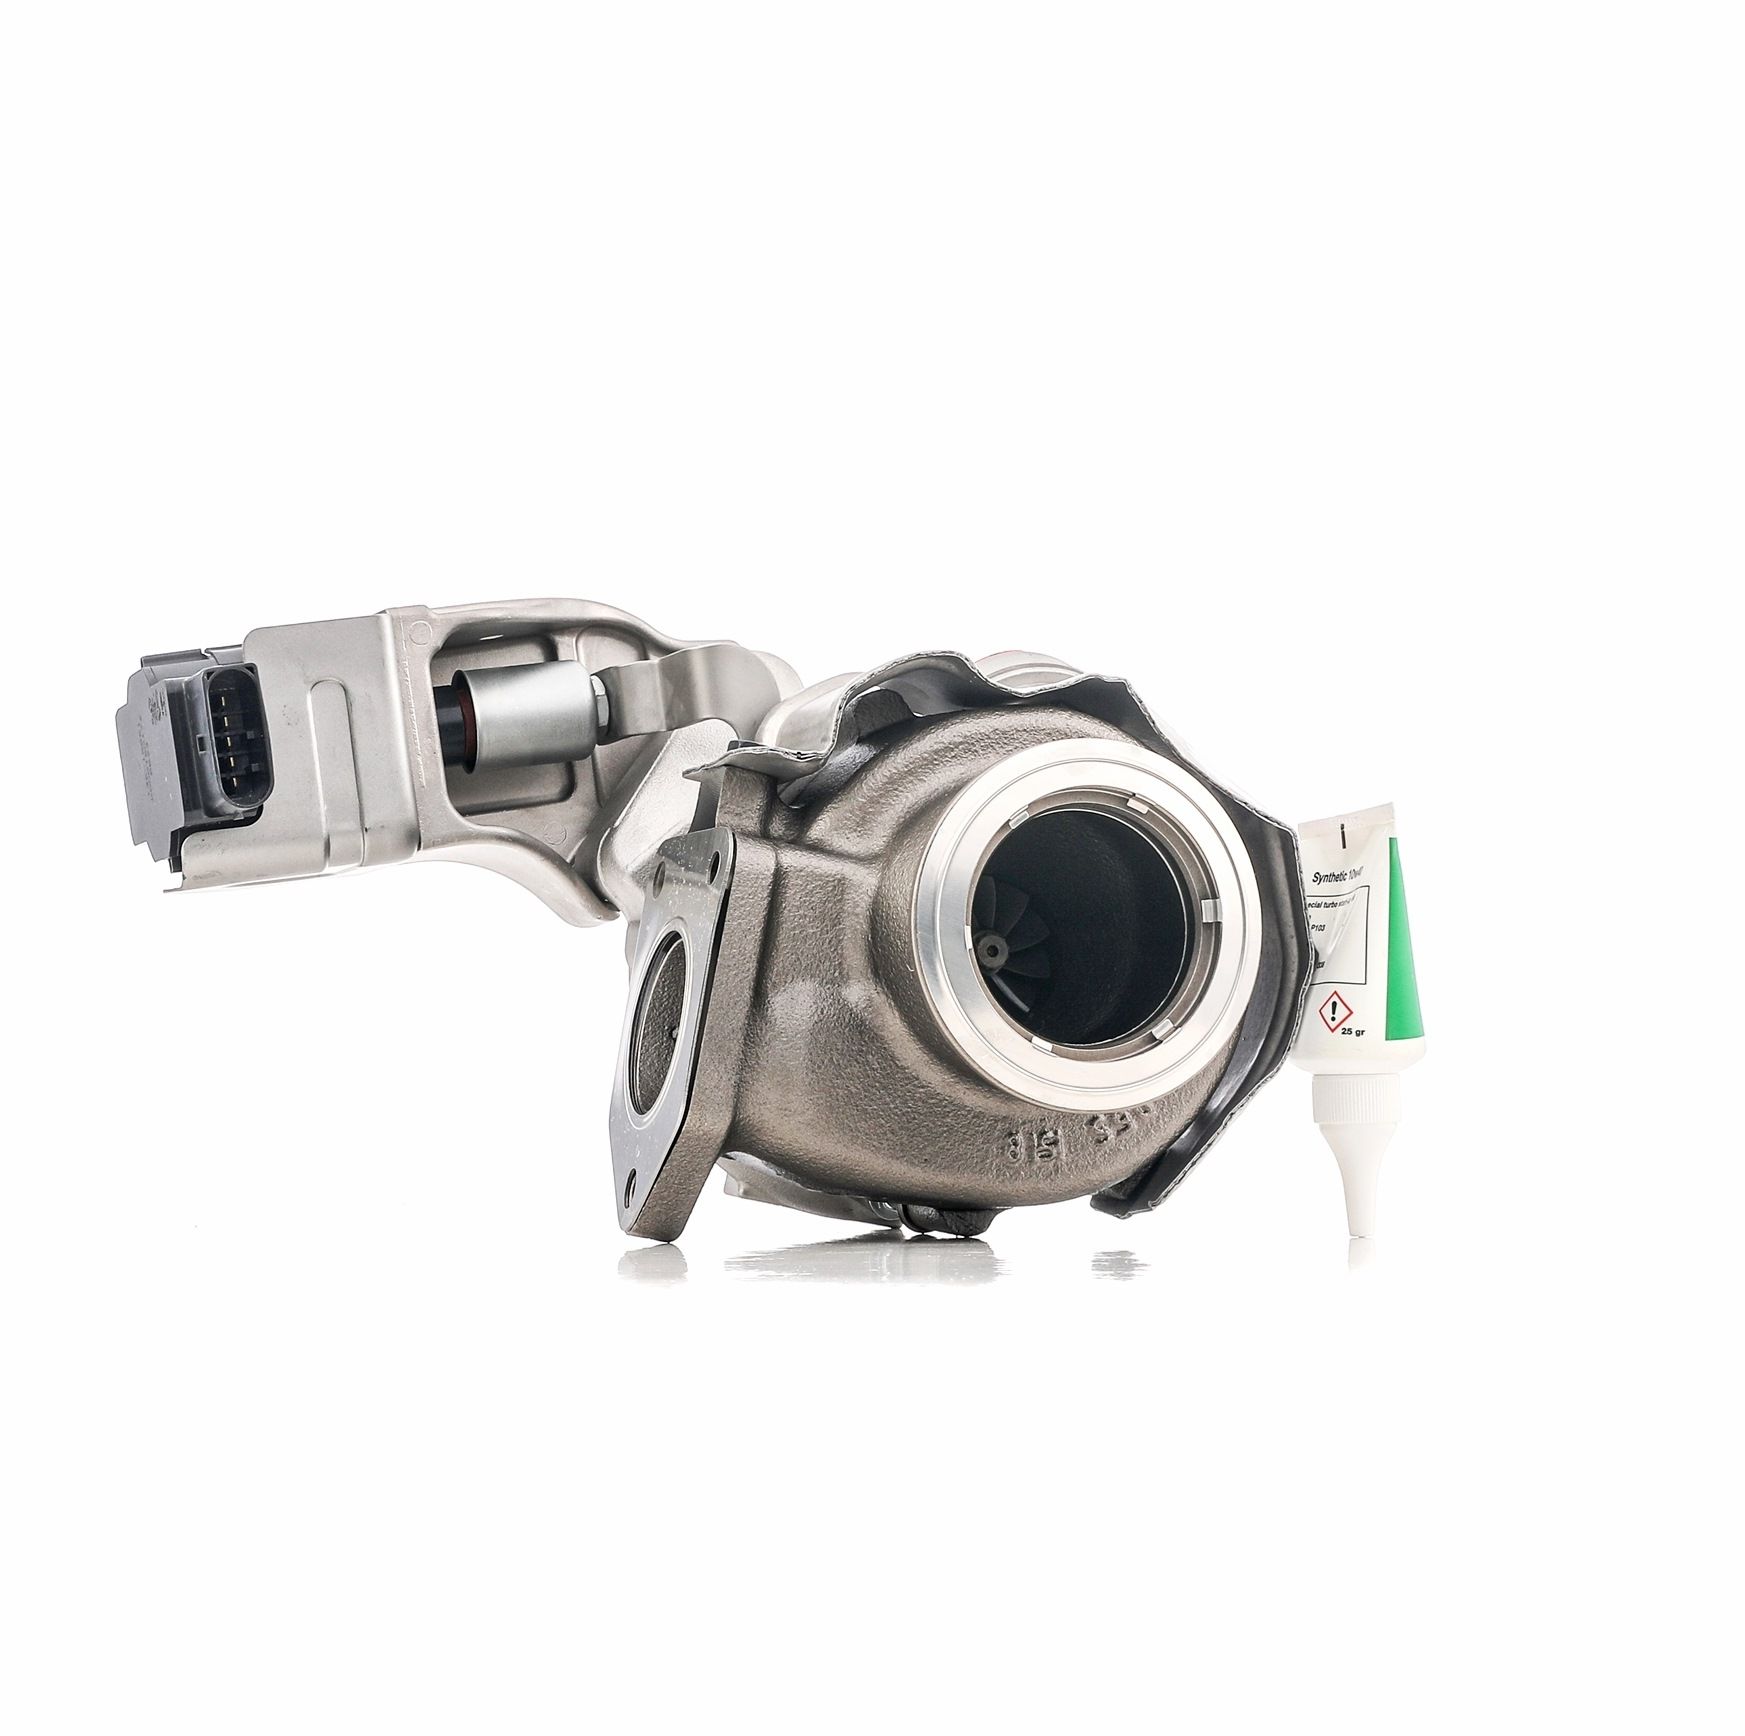 LUCAS LTRPA4913505895 Turbocharger Exhaust Turbocharger, Electrically controlled actuator, with gaskets/seals